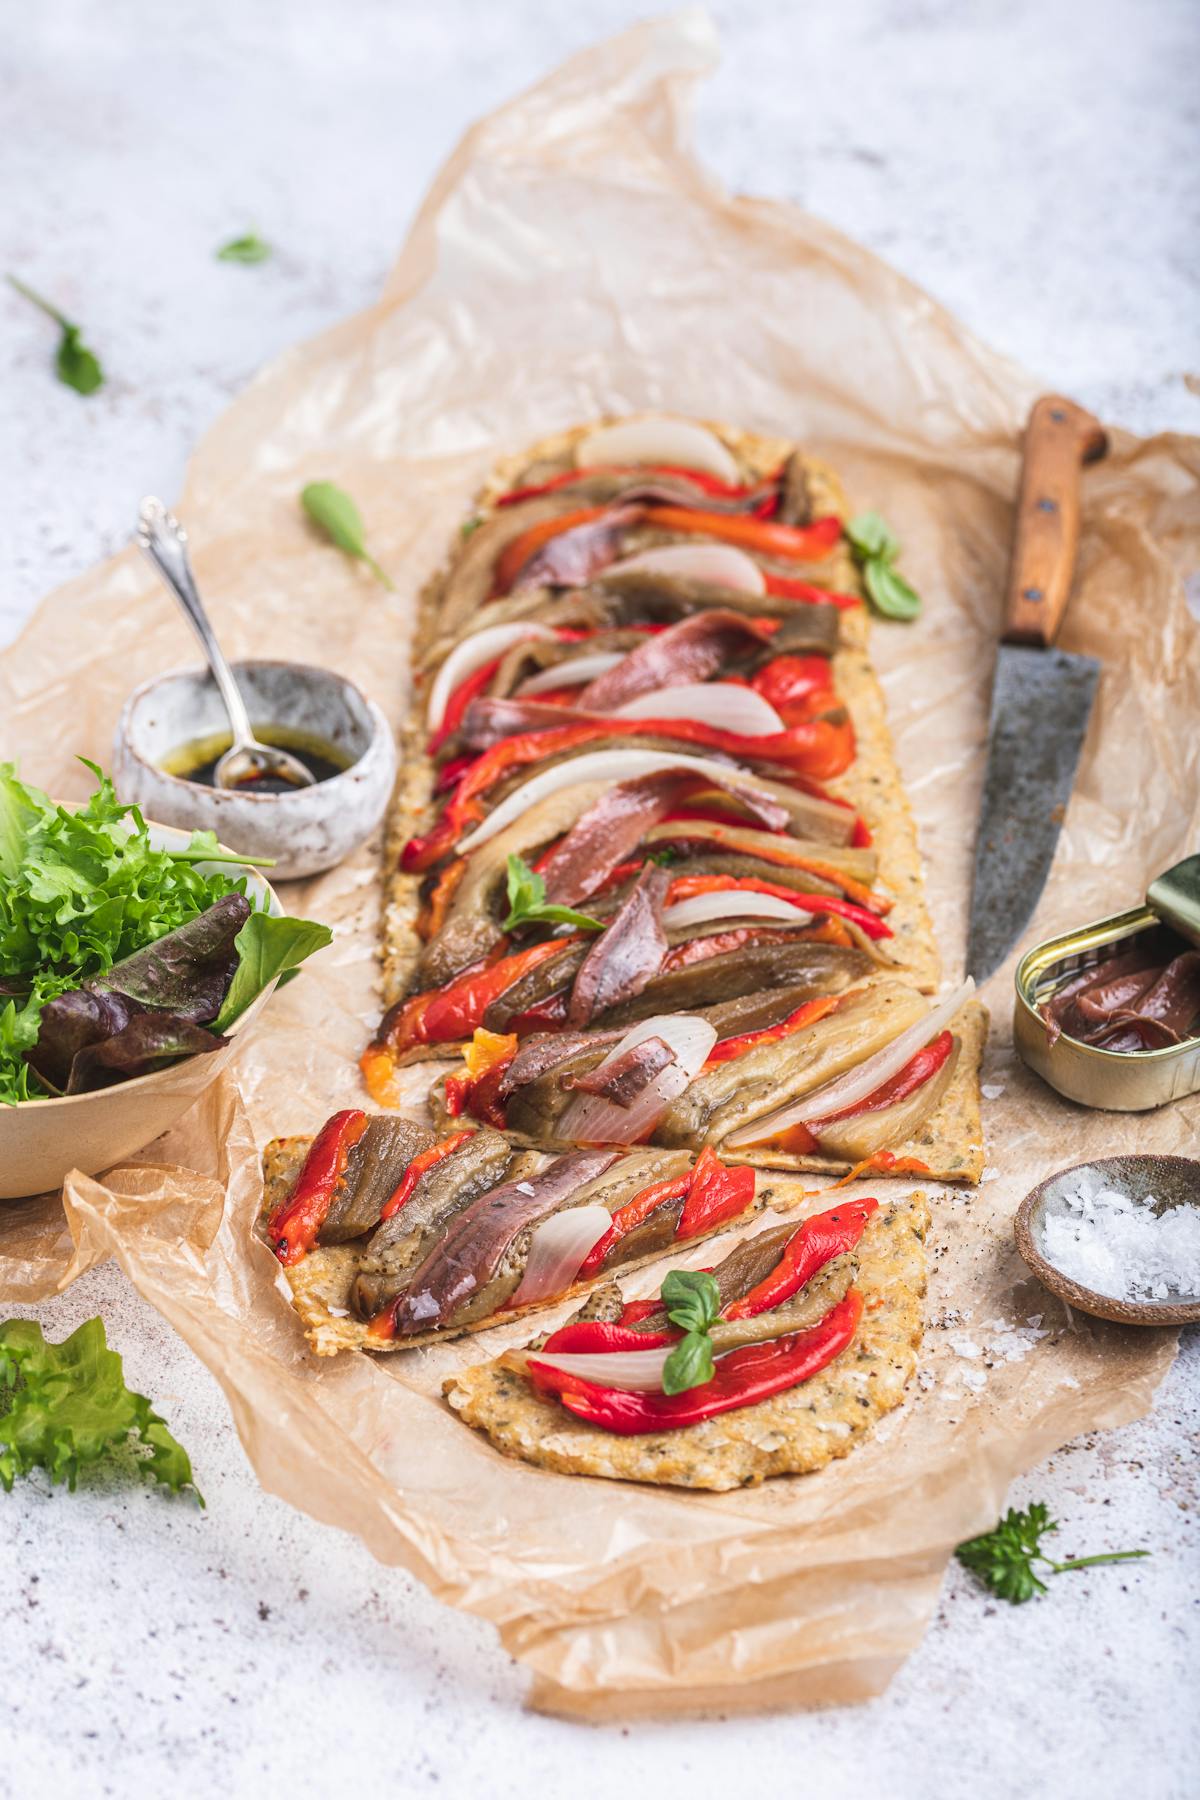 Mediterranean high-protein pizza with roasted vegetables and anchovies